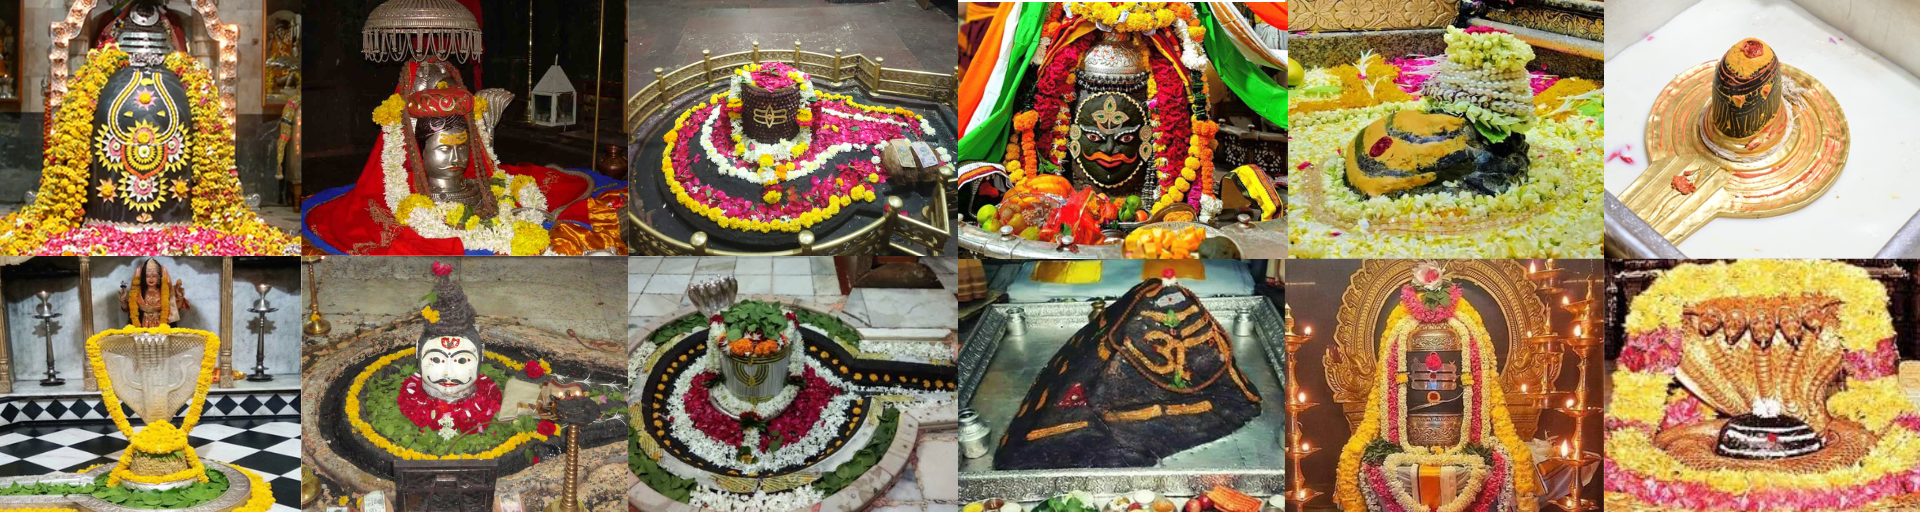 12 jyotirlinga temple tour package